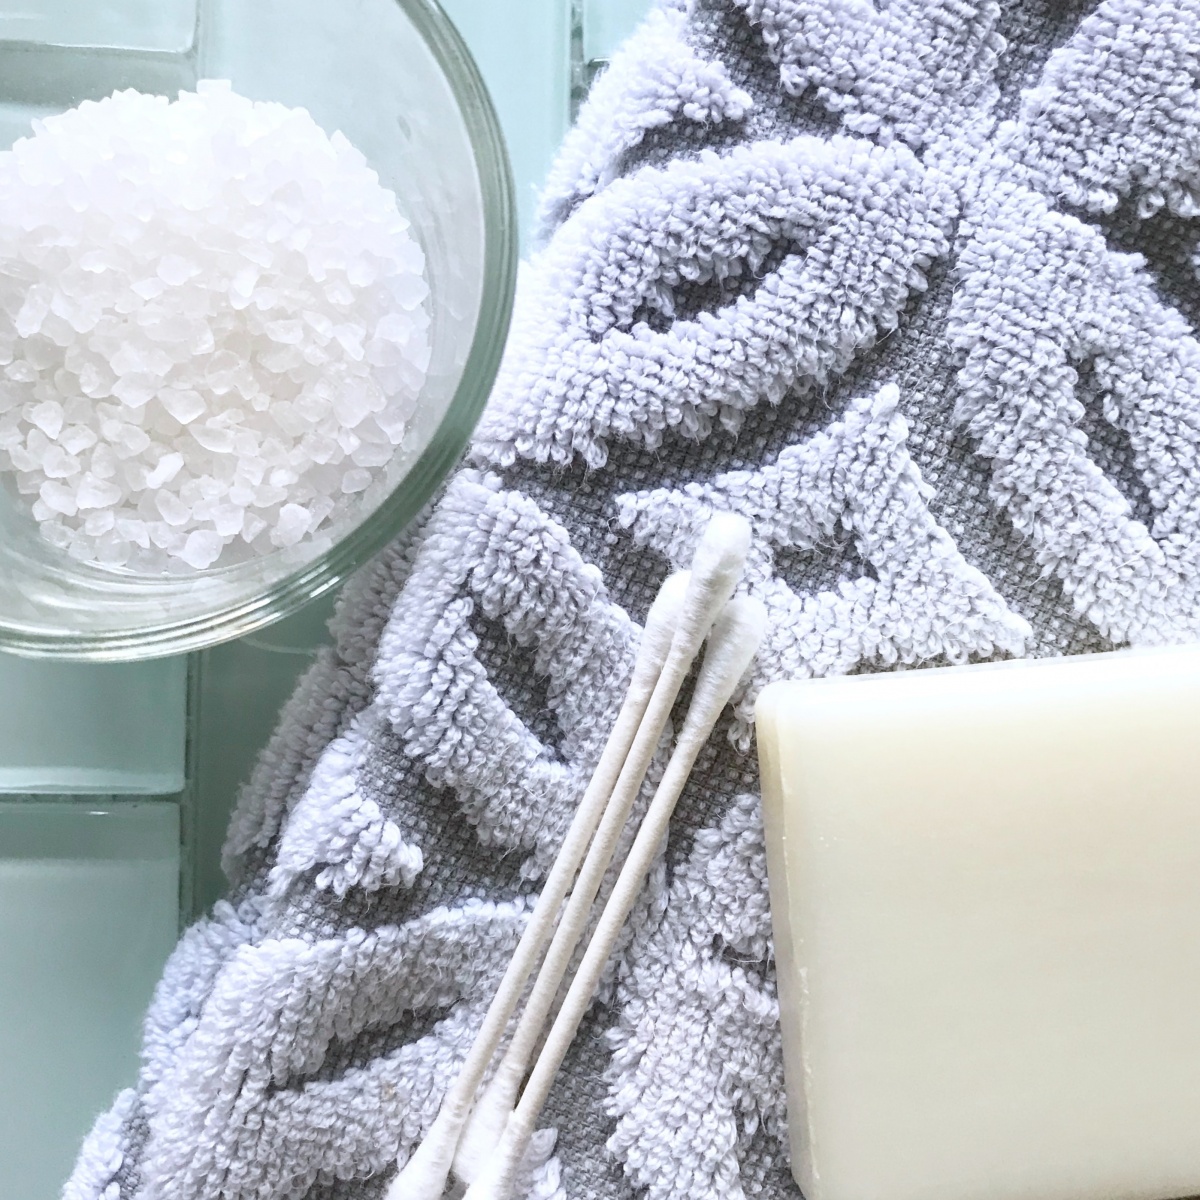 Re-evaluating toiletries to bring before you travel.